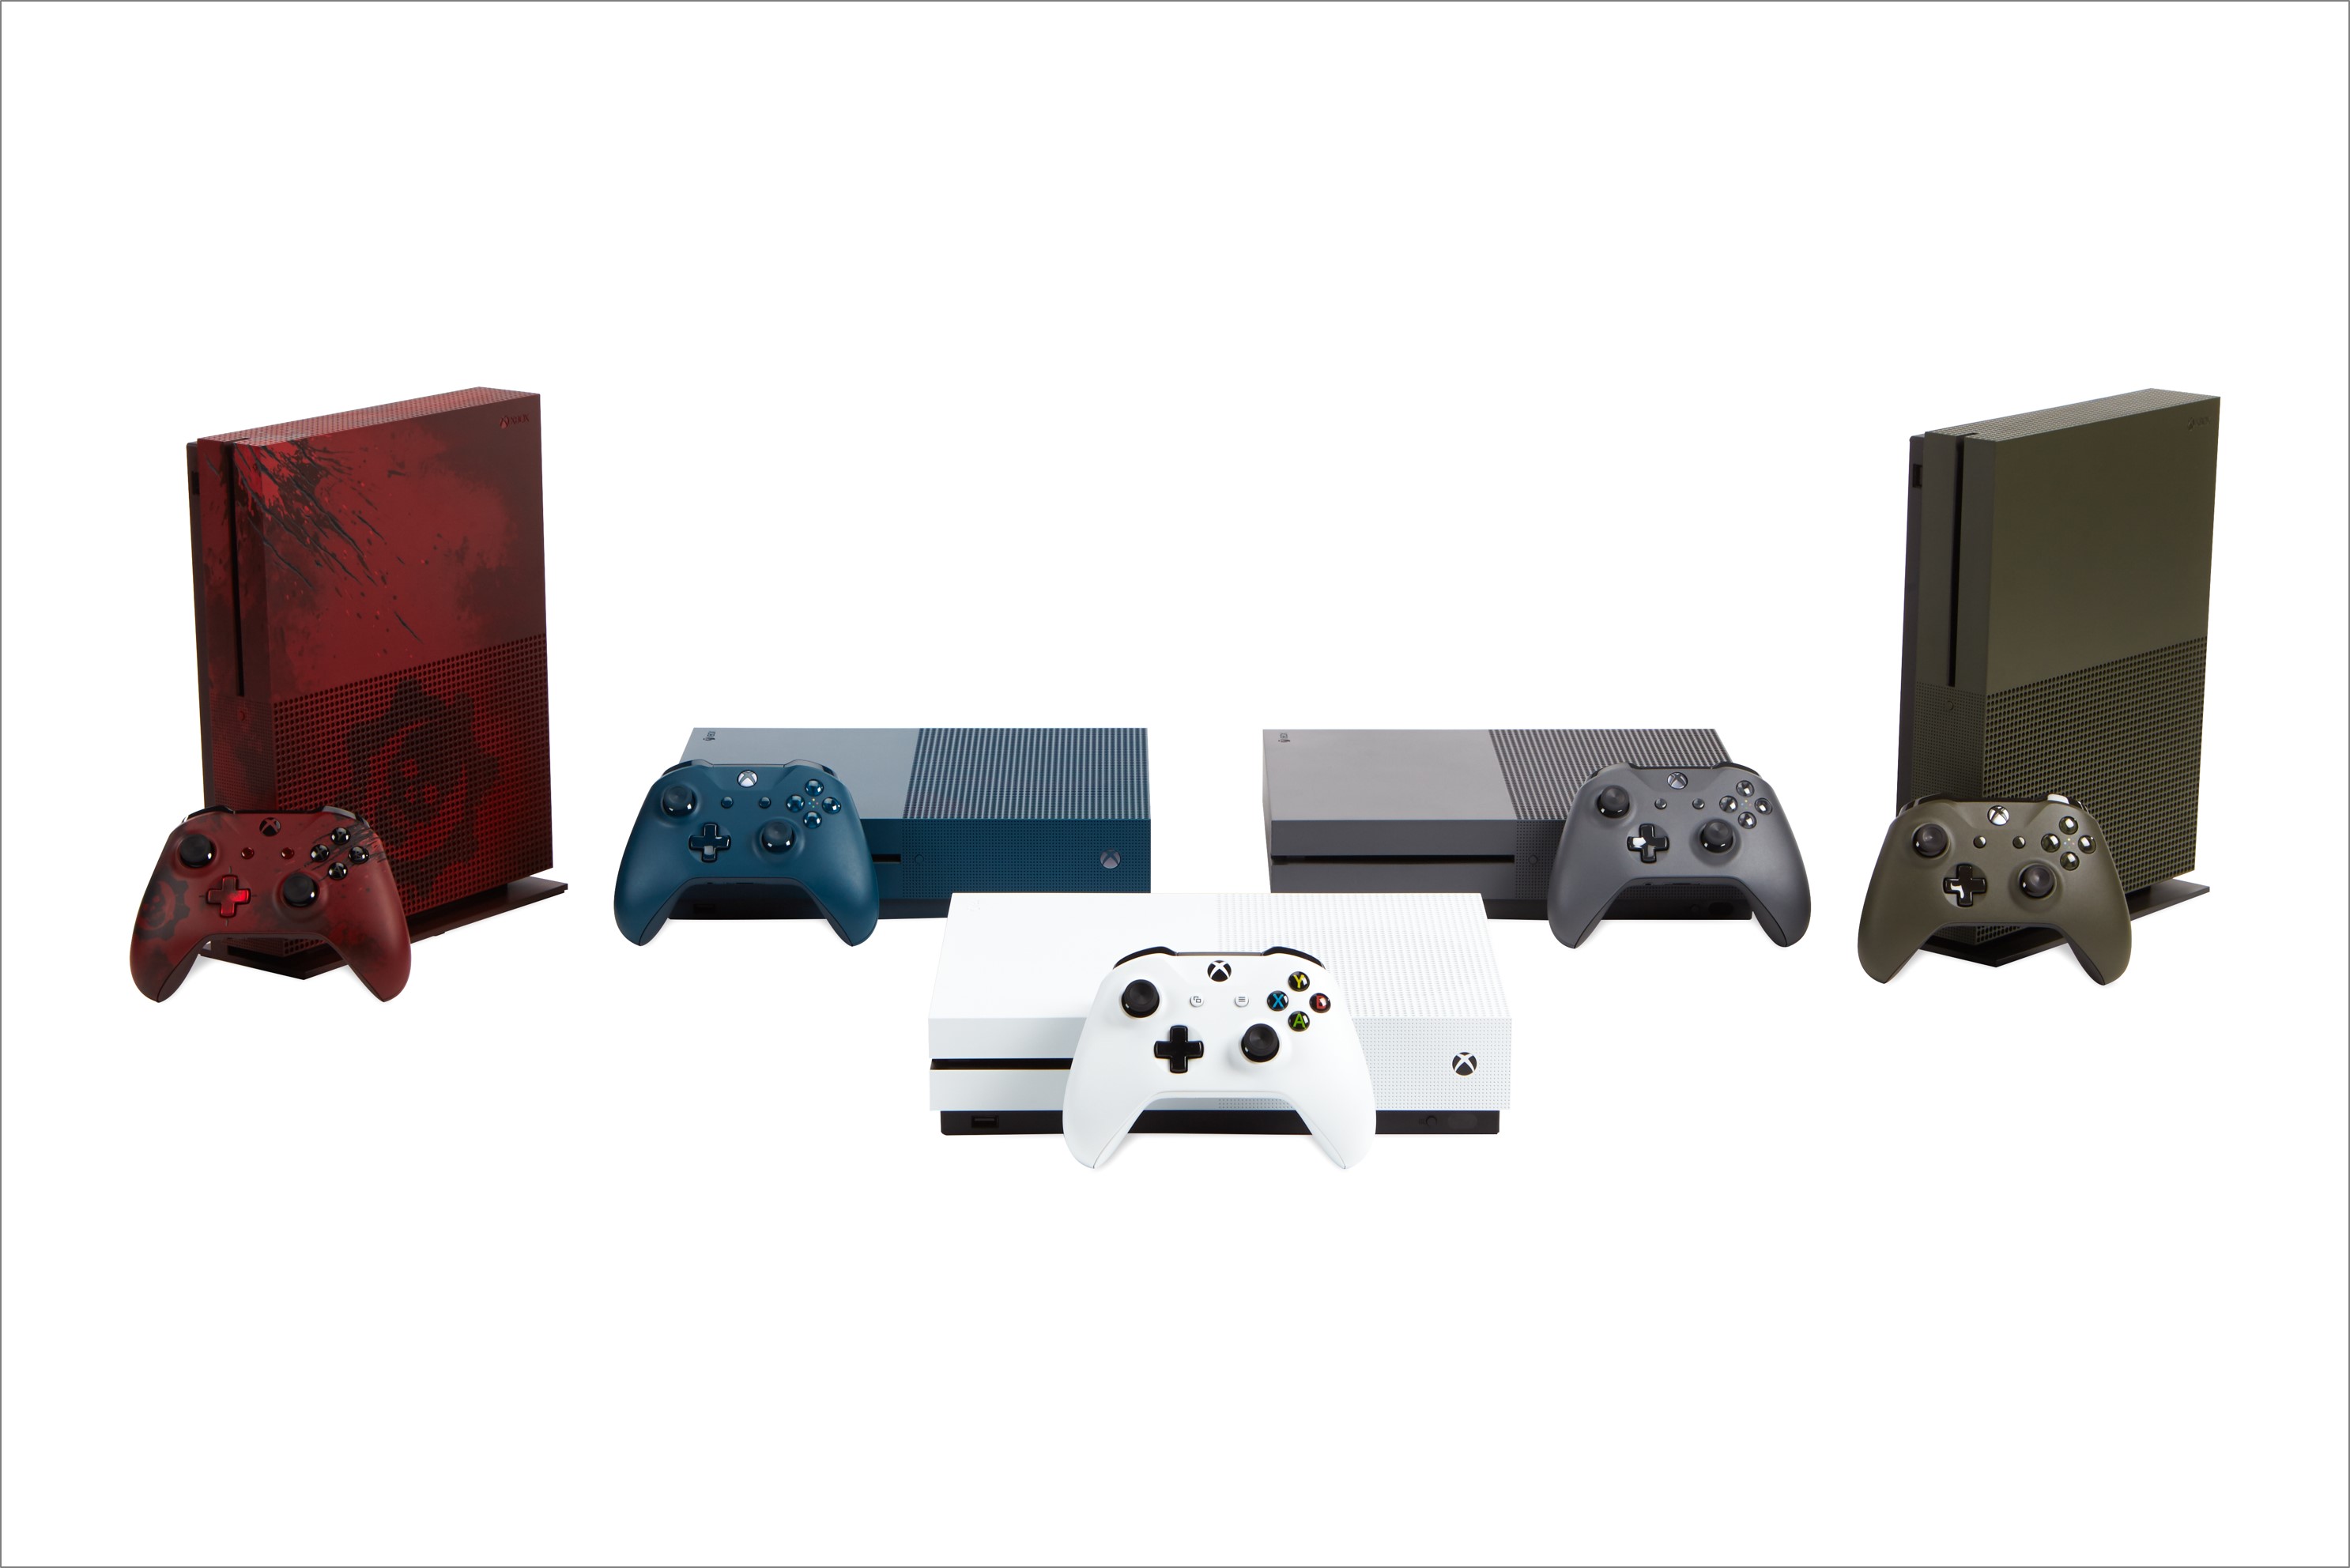 Product shot of various Xbox One S consoles